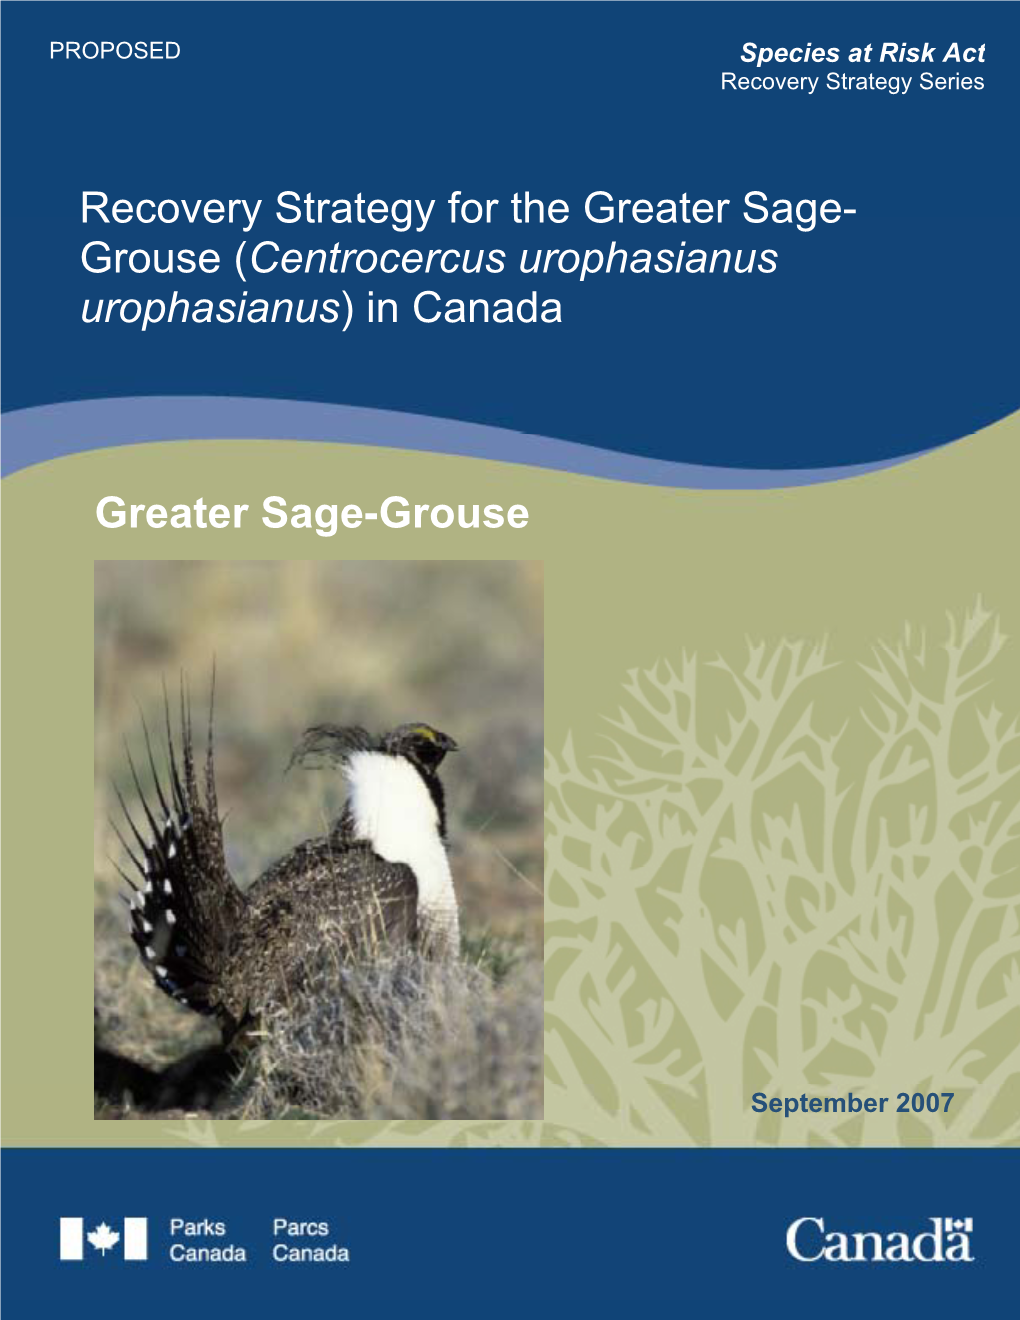 Recovery Strategy for the Greater Sage-Grouse (Centrocercus Urophasianus Urophasianus) in Canada [PROPOSED]